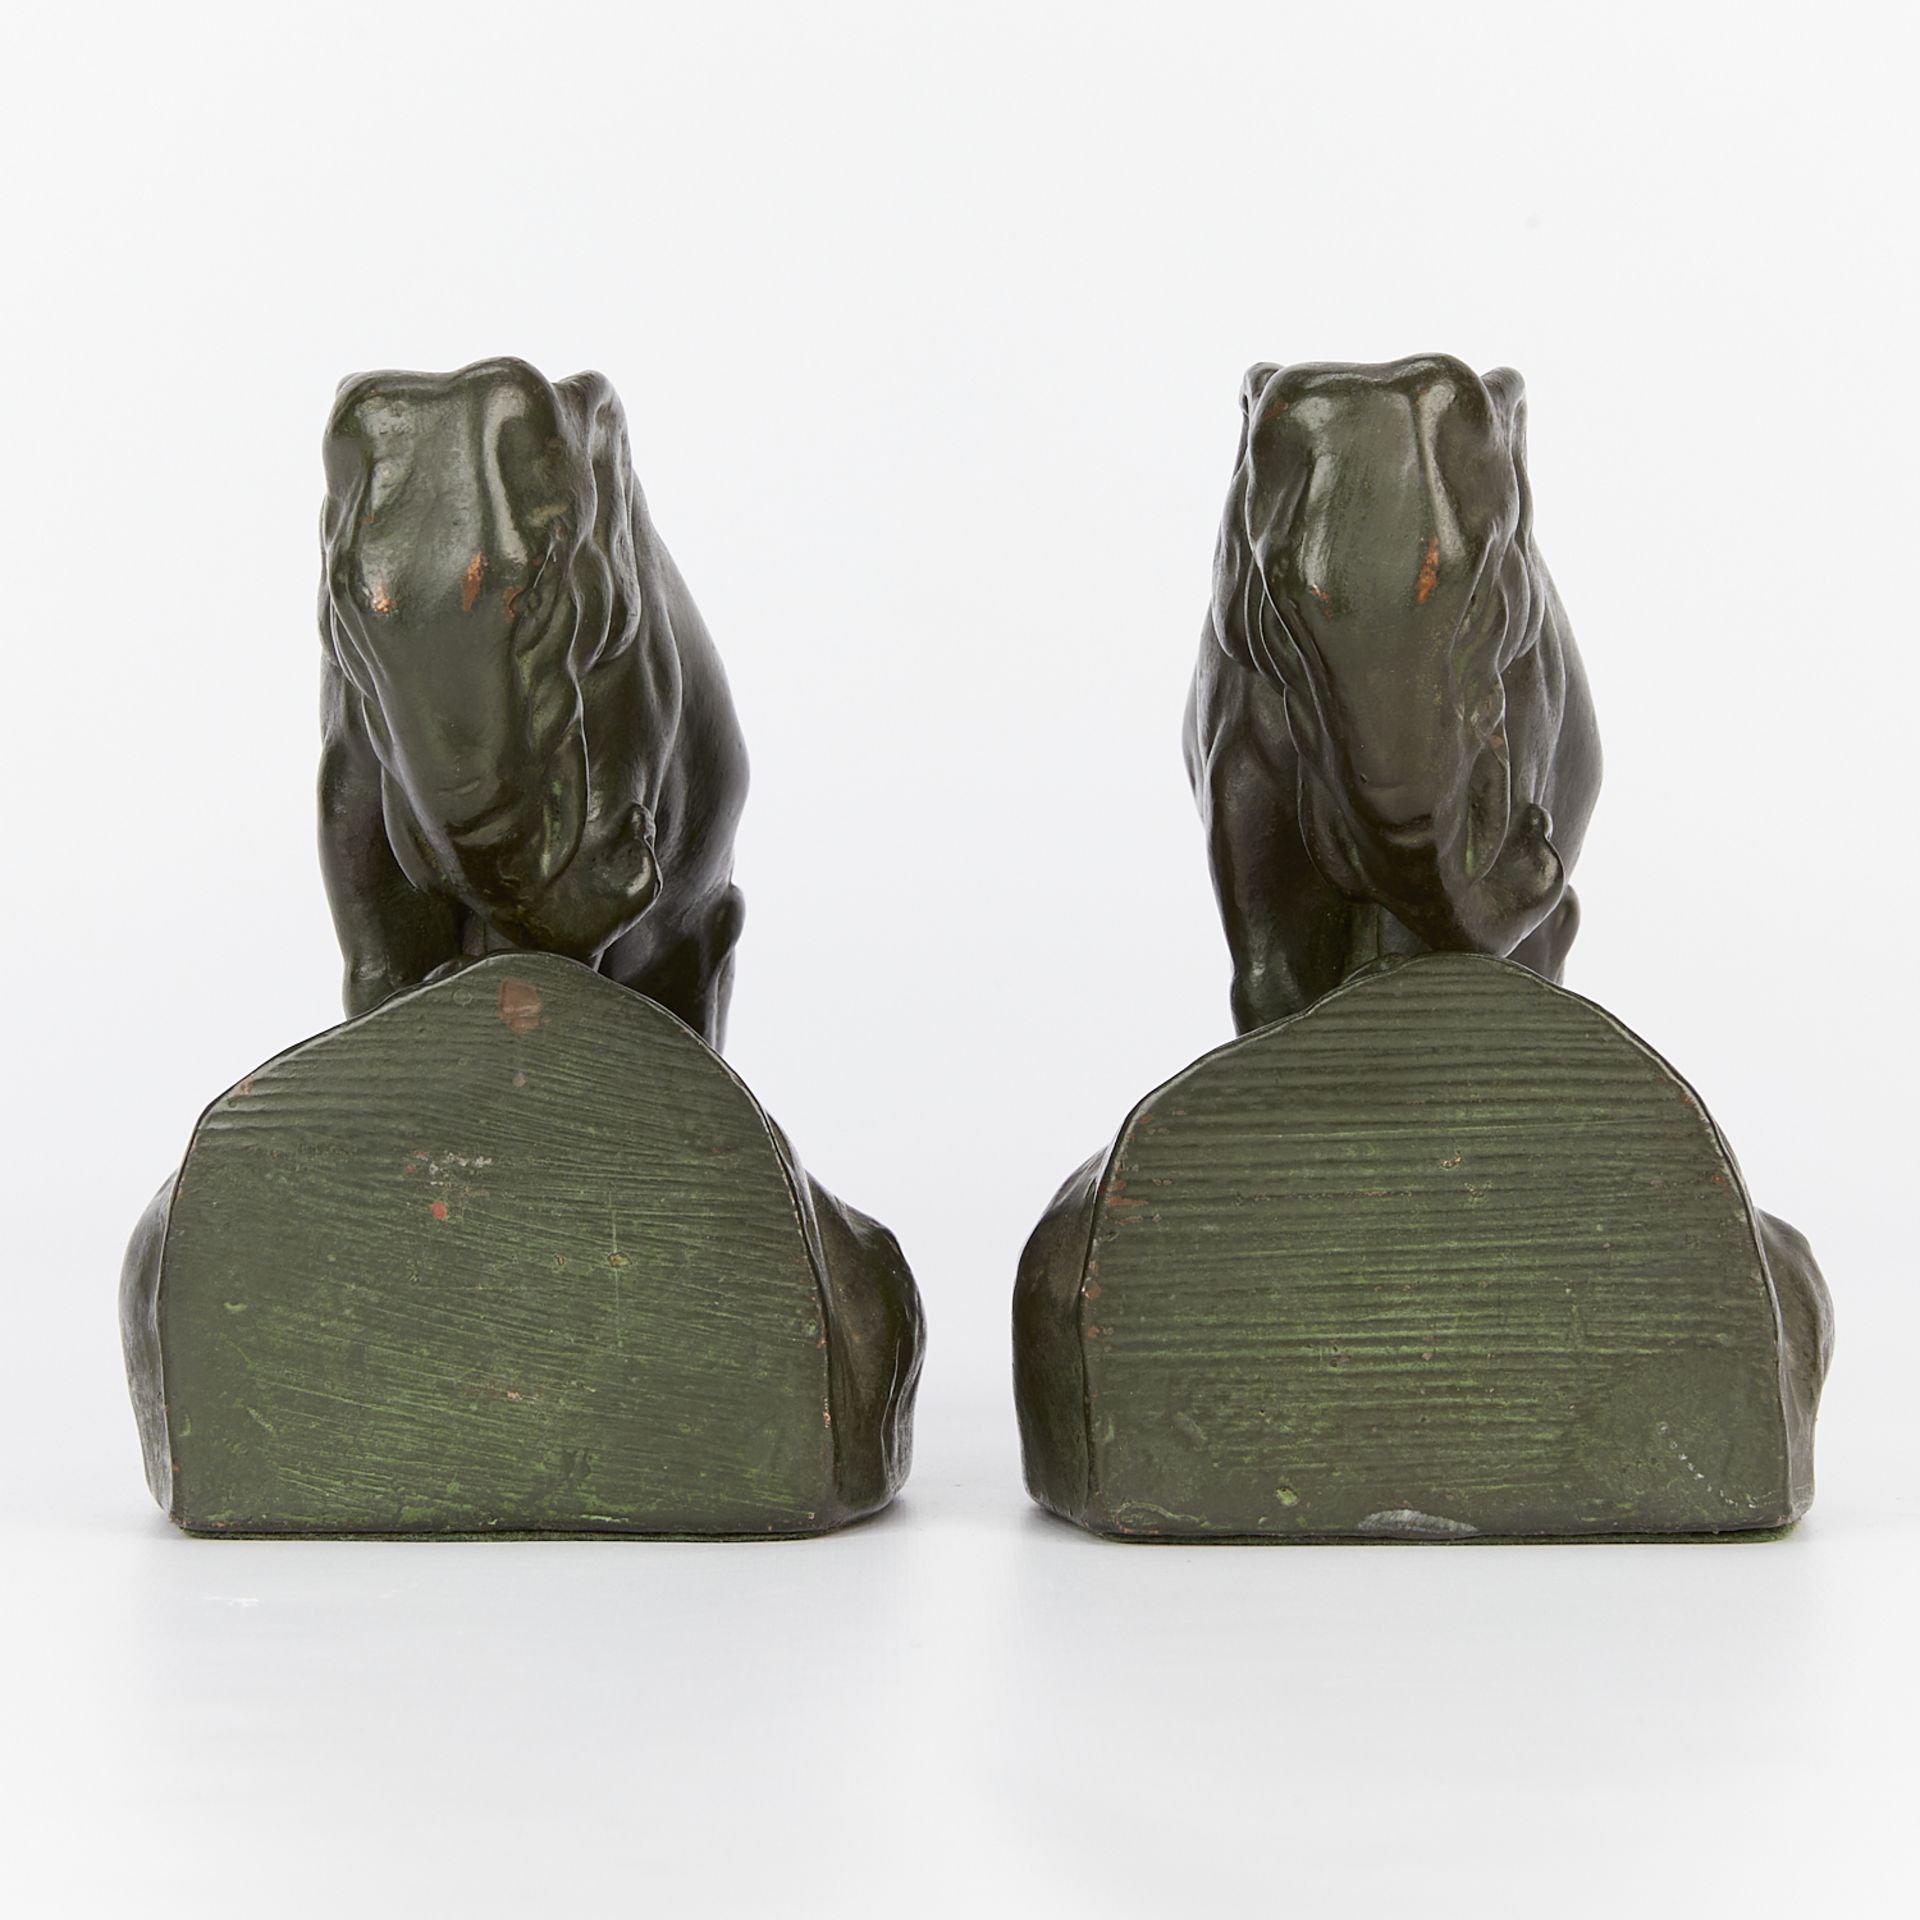 Pair of Bronze or Copper Elephant Bookends - Image 4 of 11